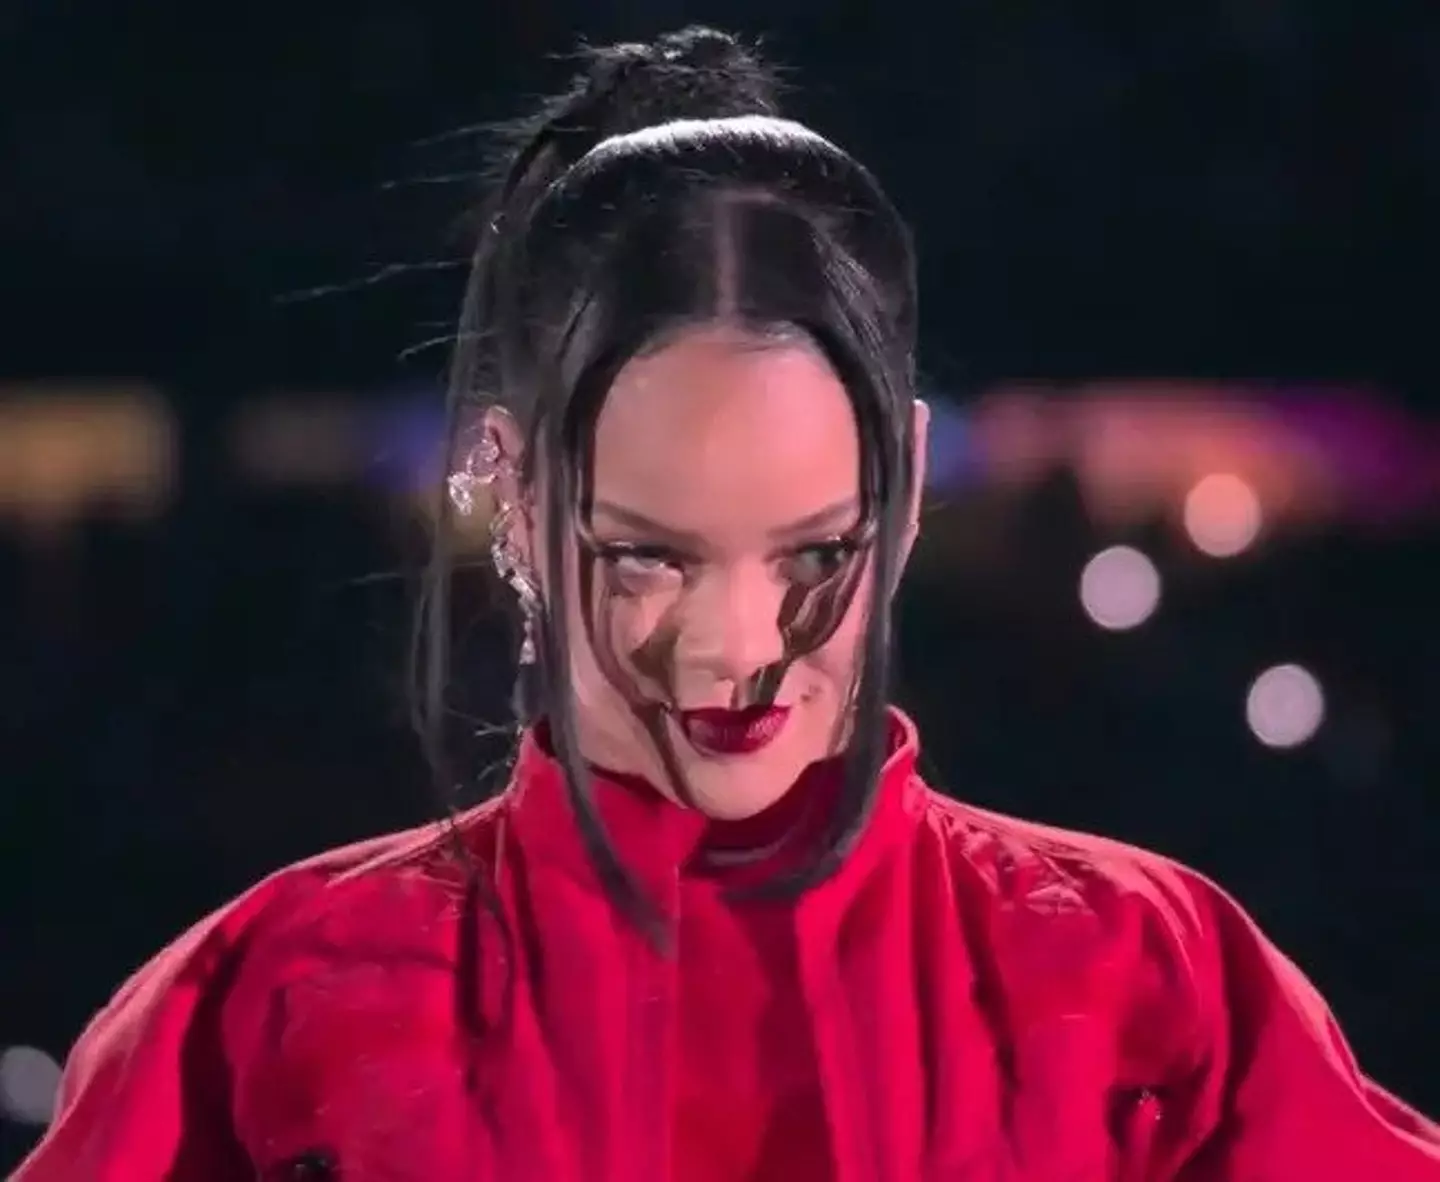 Some think Rihanna was lip syncing during her Super Bowl performance.